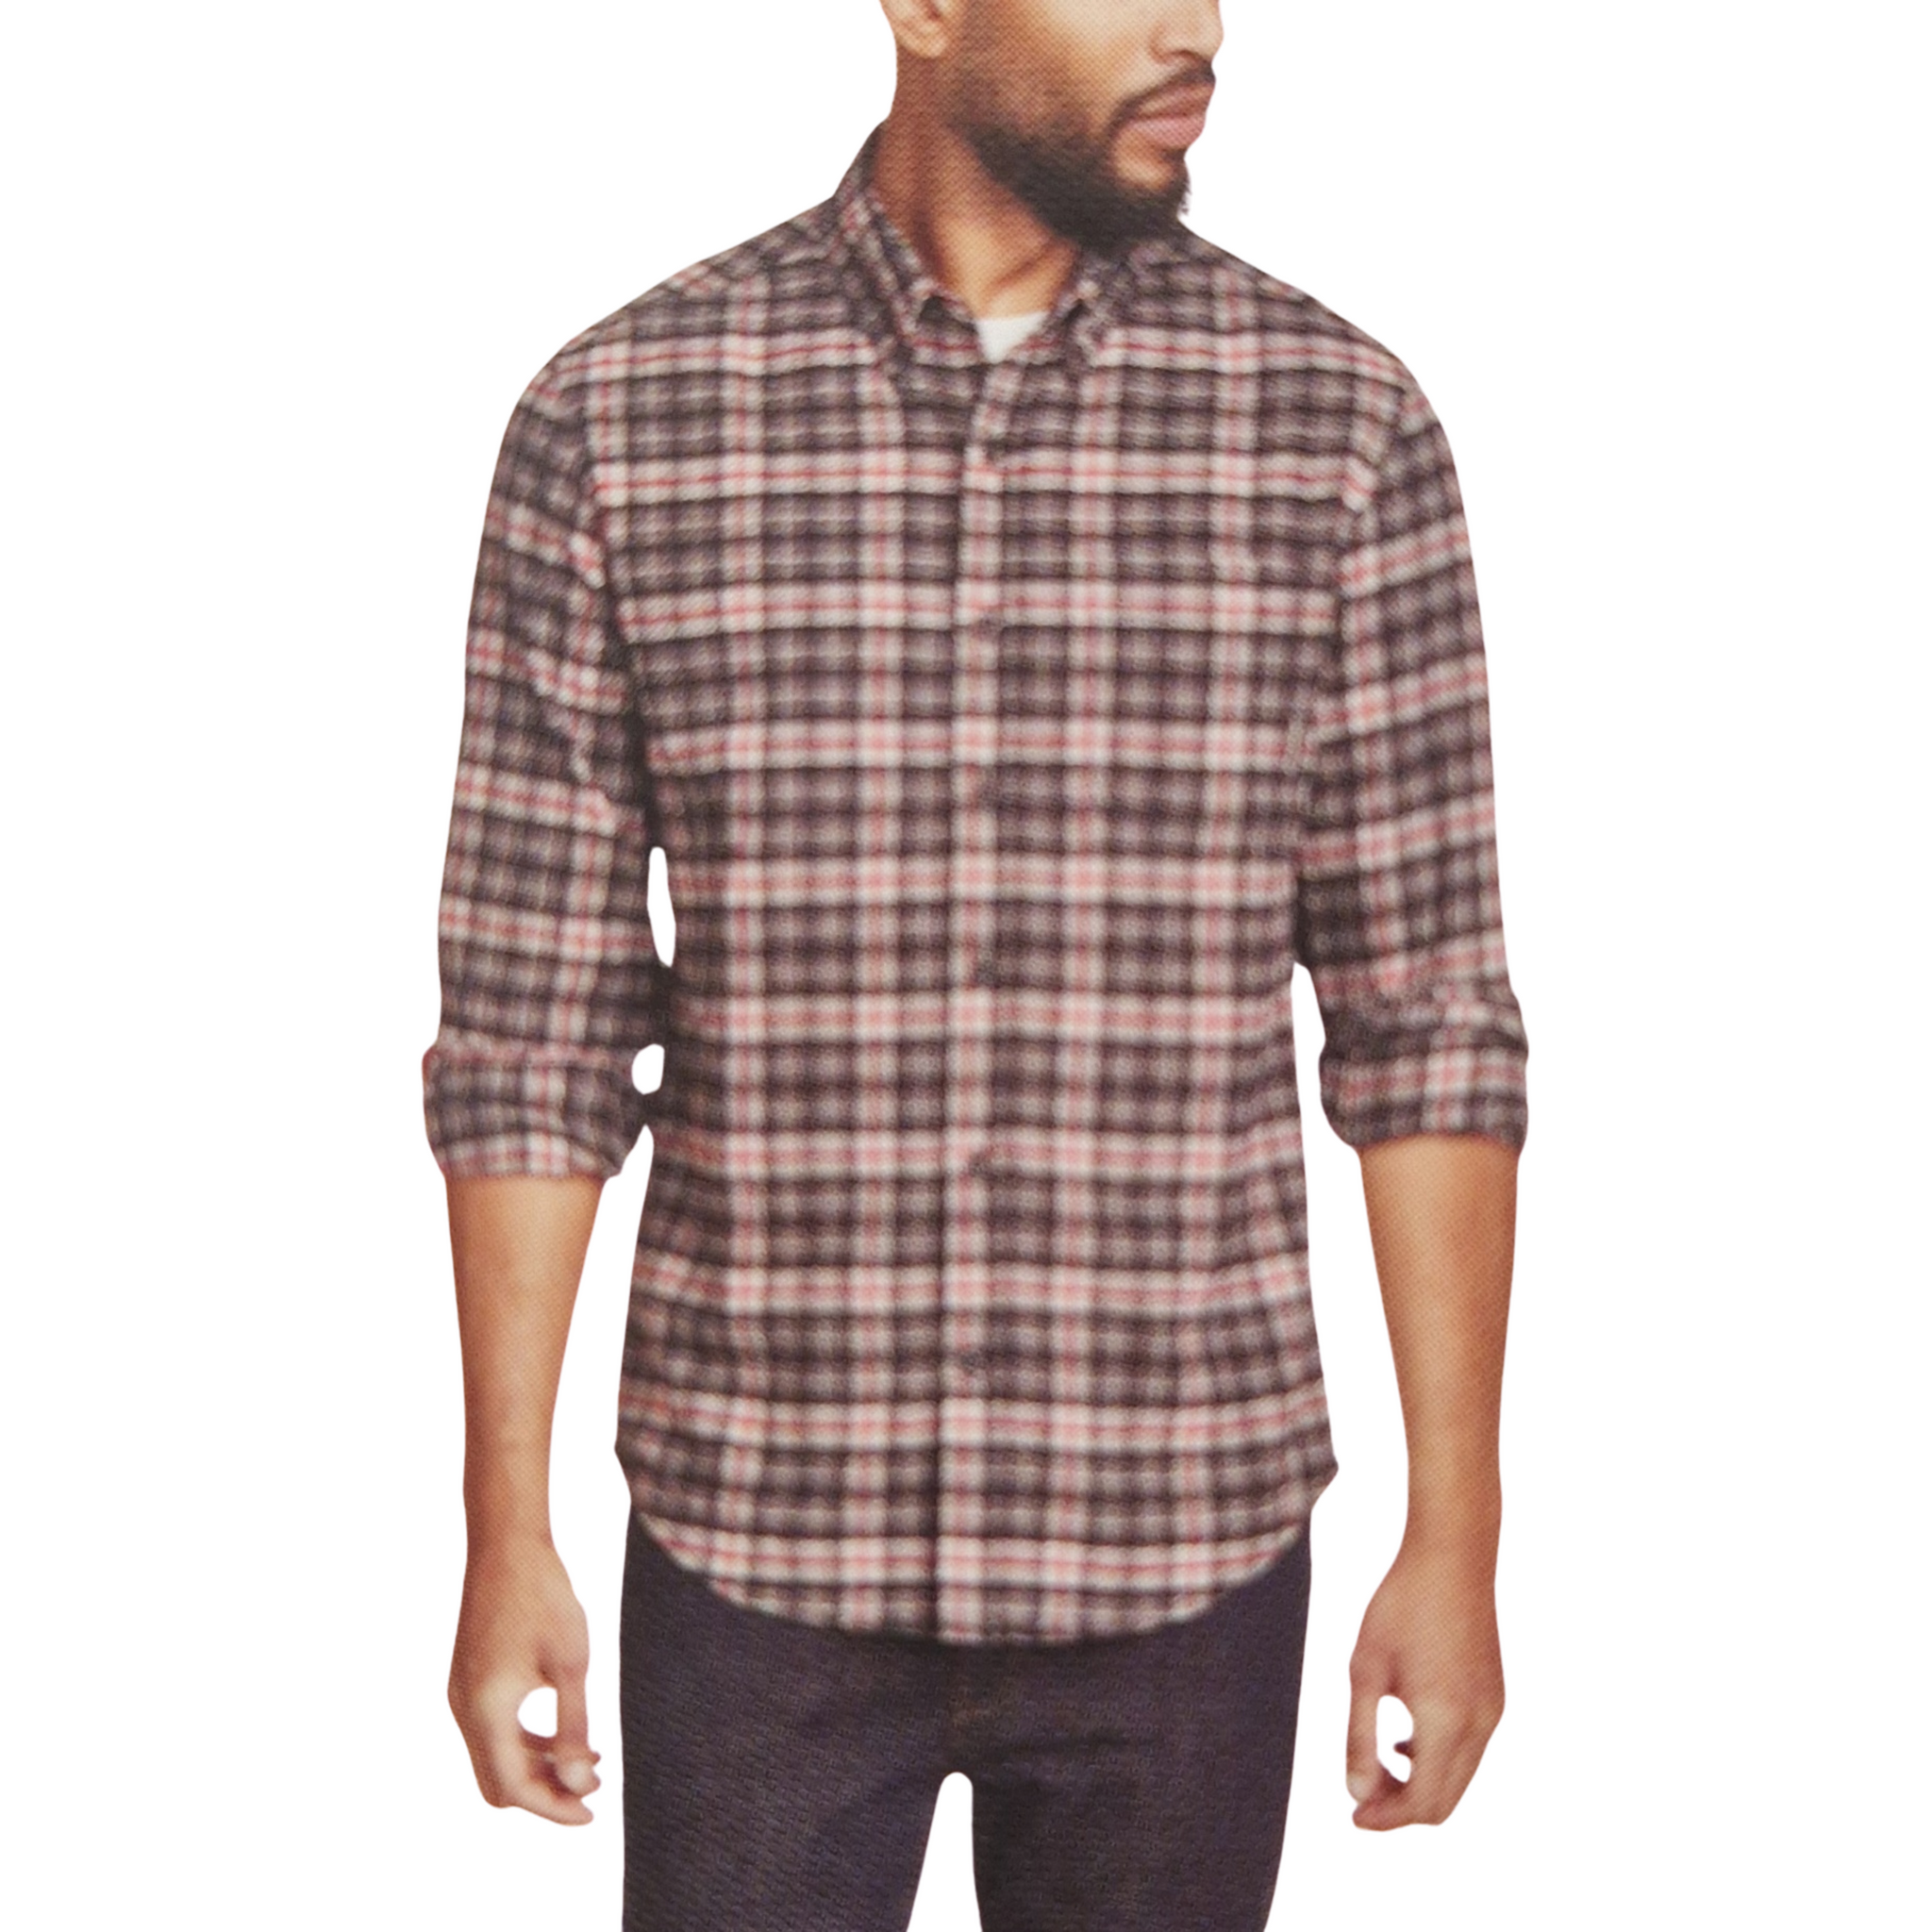 Shirt for Men in checkered flannel